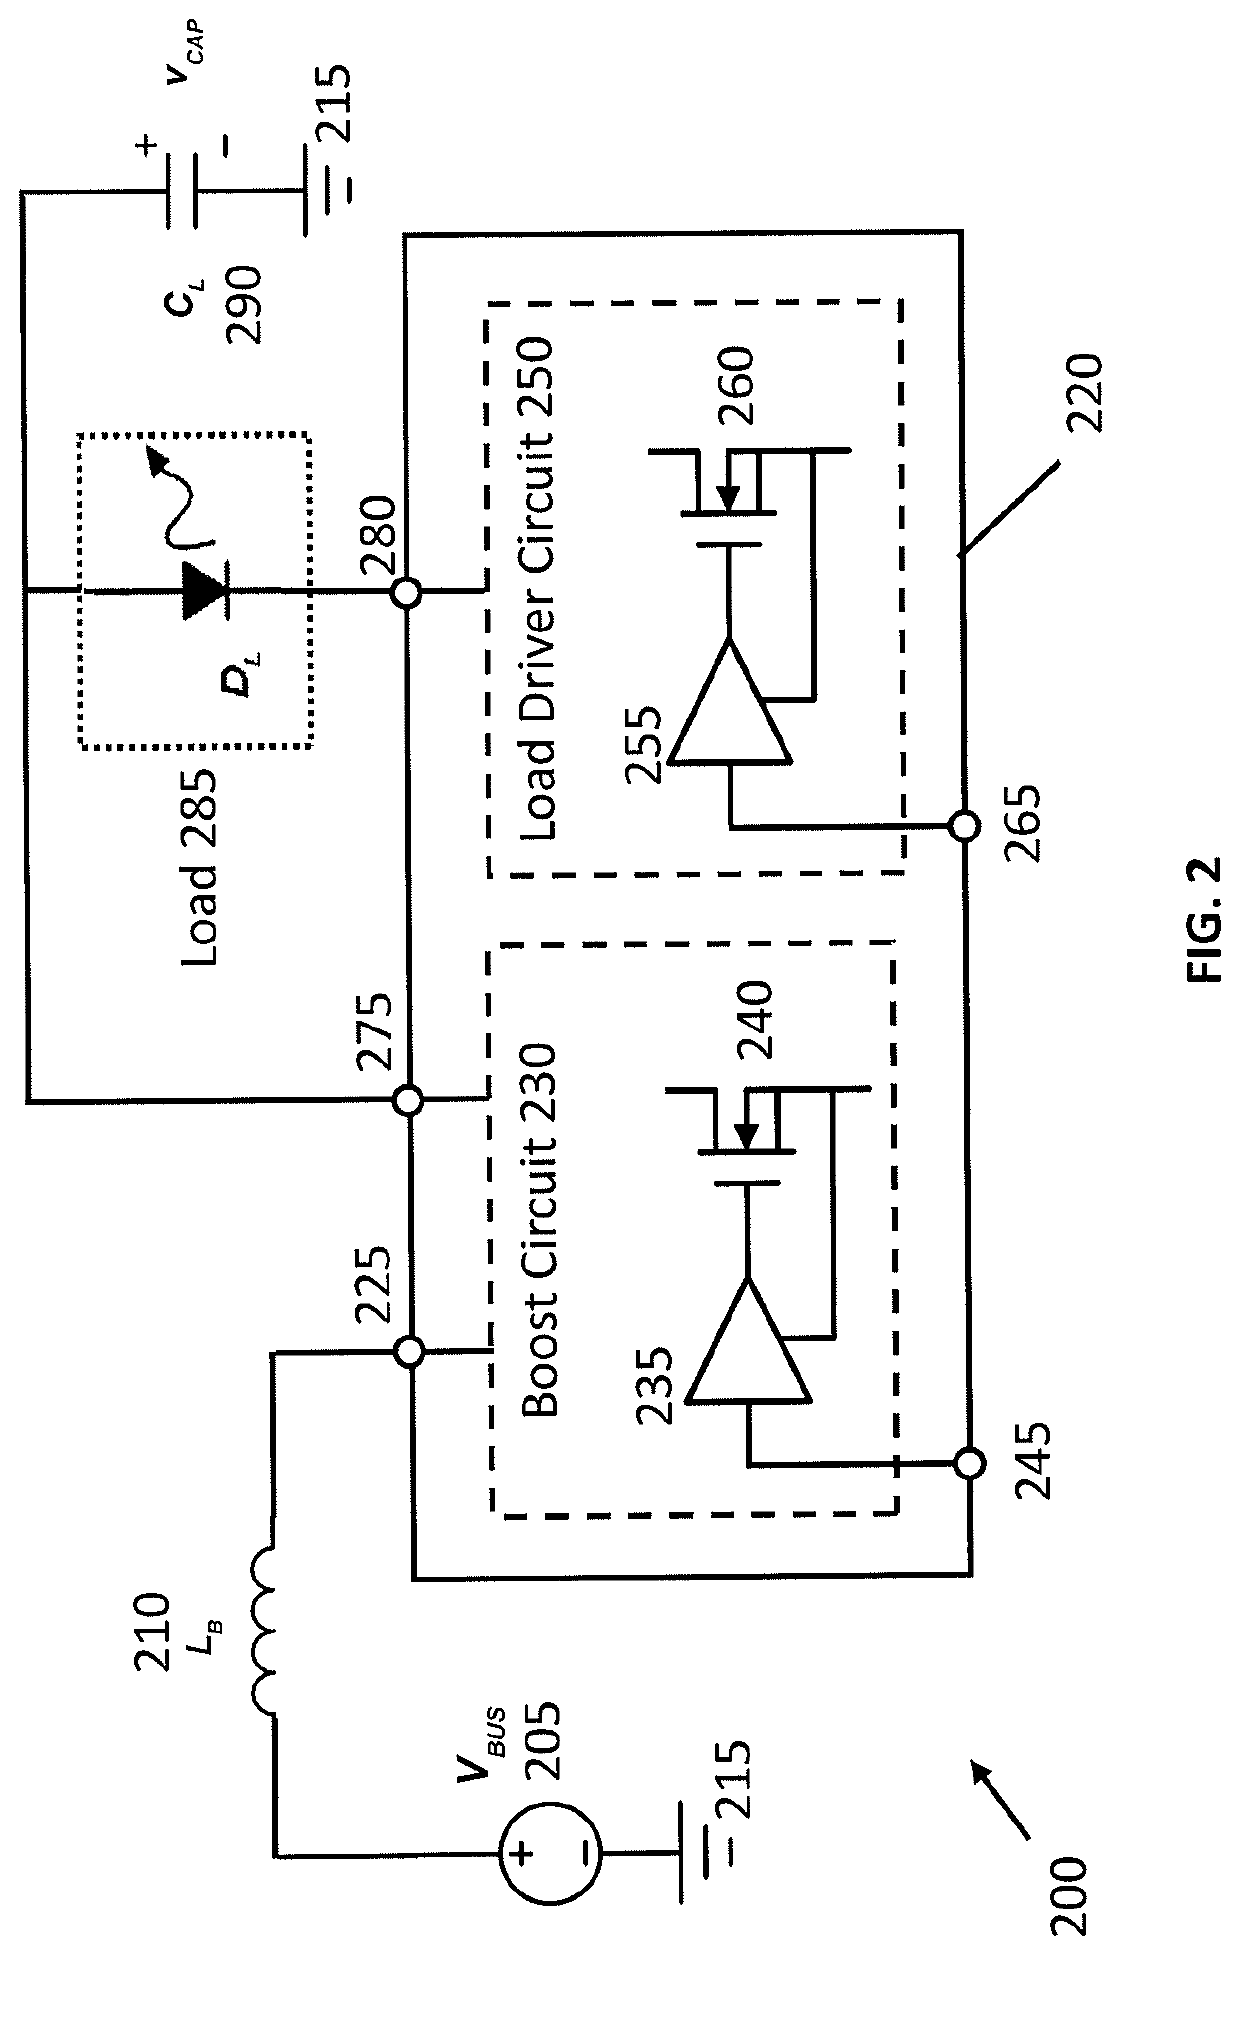 Current pulse generator with integrated bus boost circuit